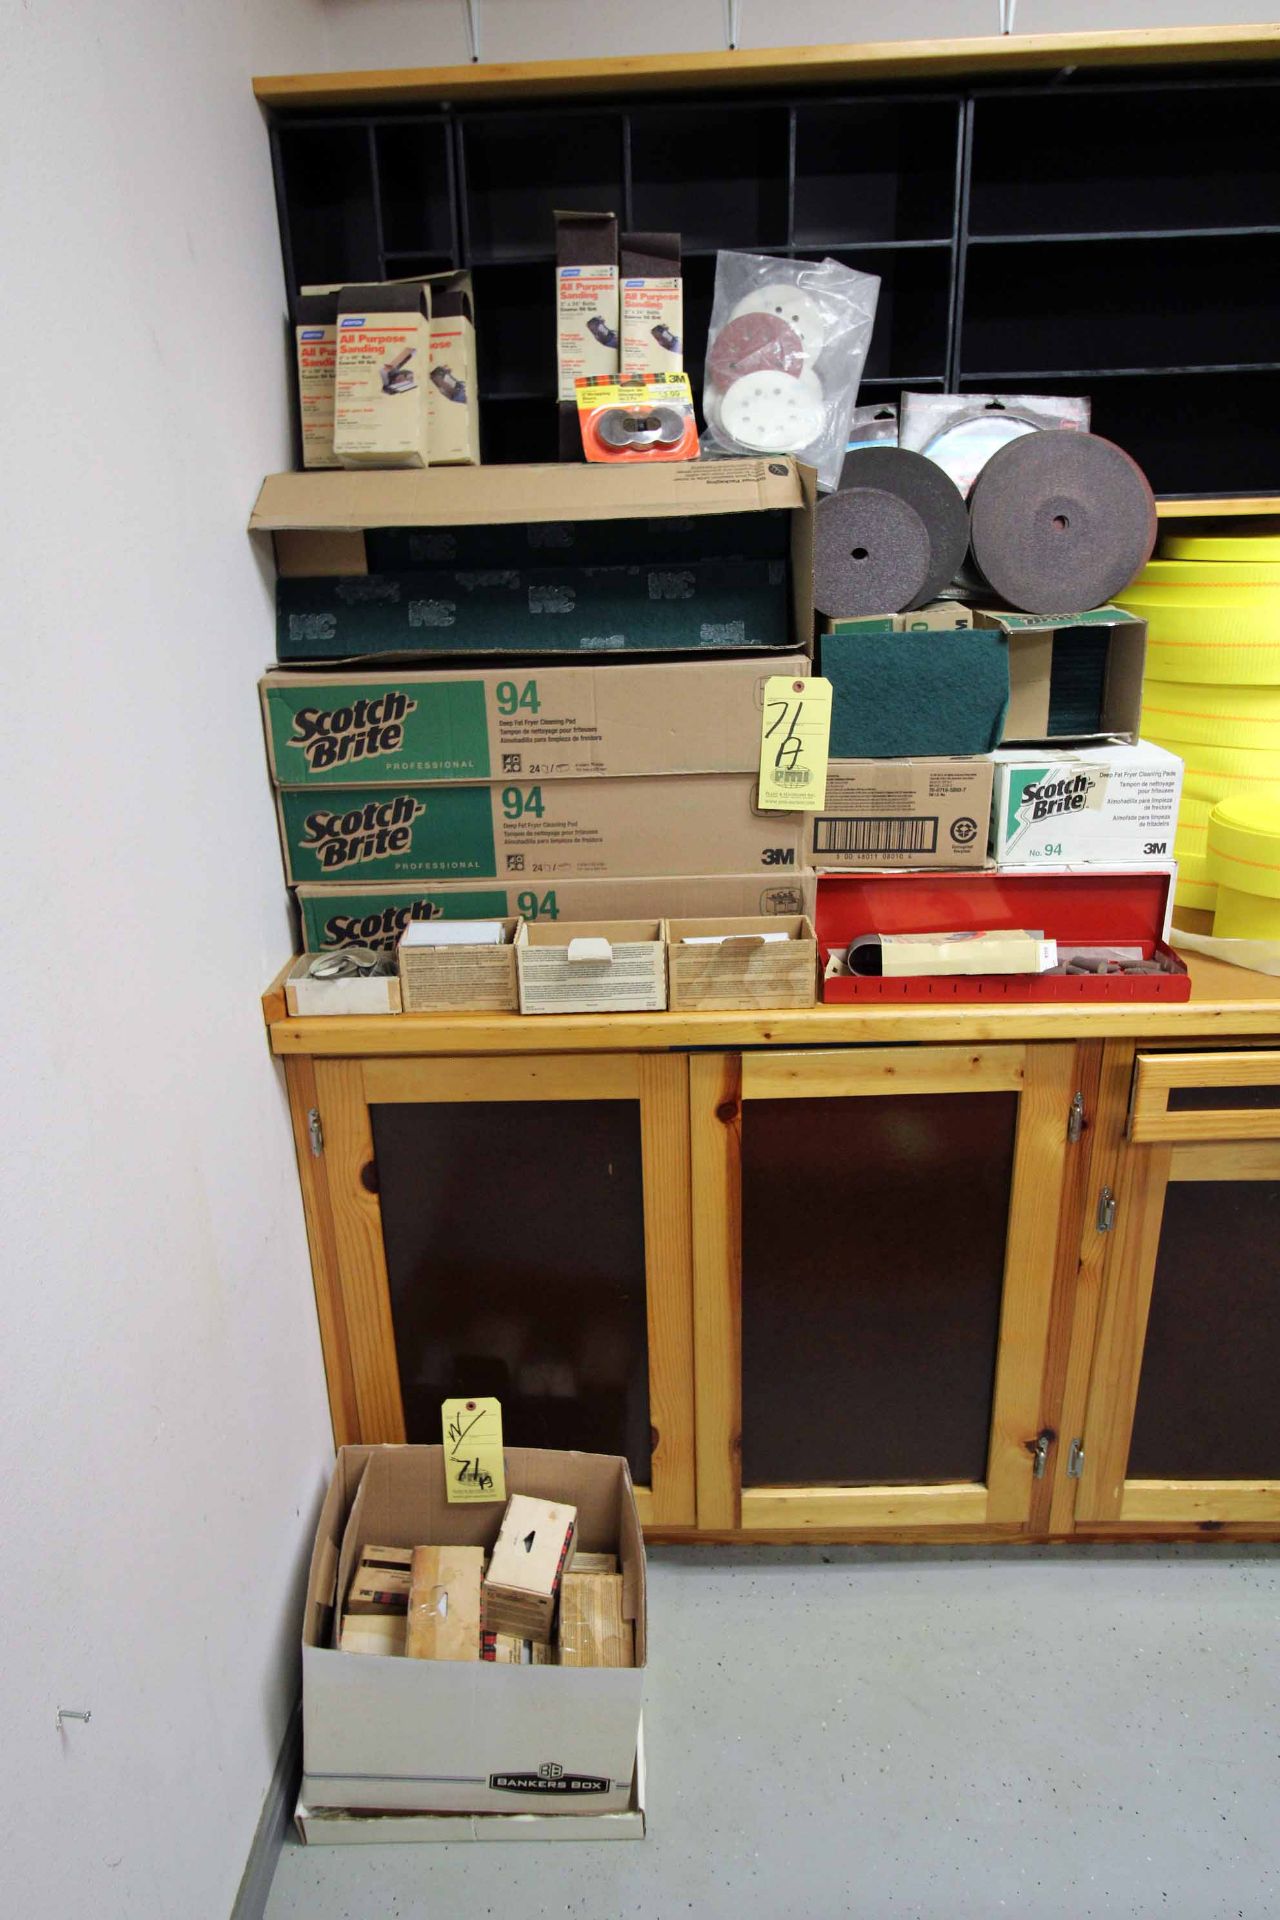 LOT CONSISTING OF: sanding discs, Scotch Brite polishing pads, sanding belts (Located at: Offshore